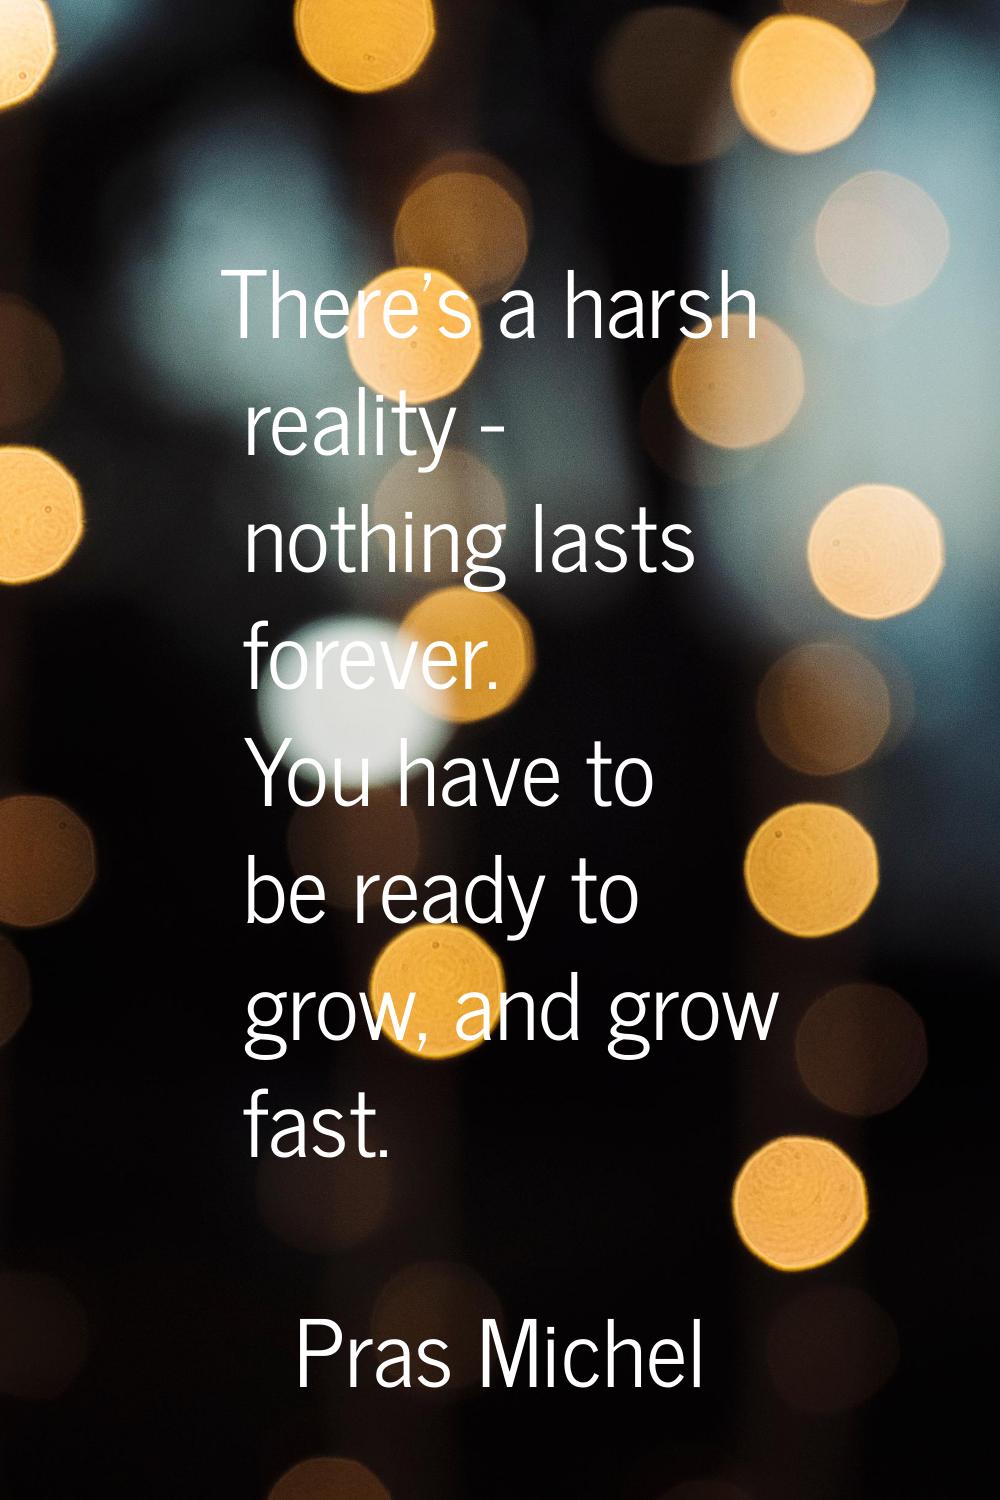 There's a harsh reality - nothing lasts forever. You have to be ready to grow, and grow fast.